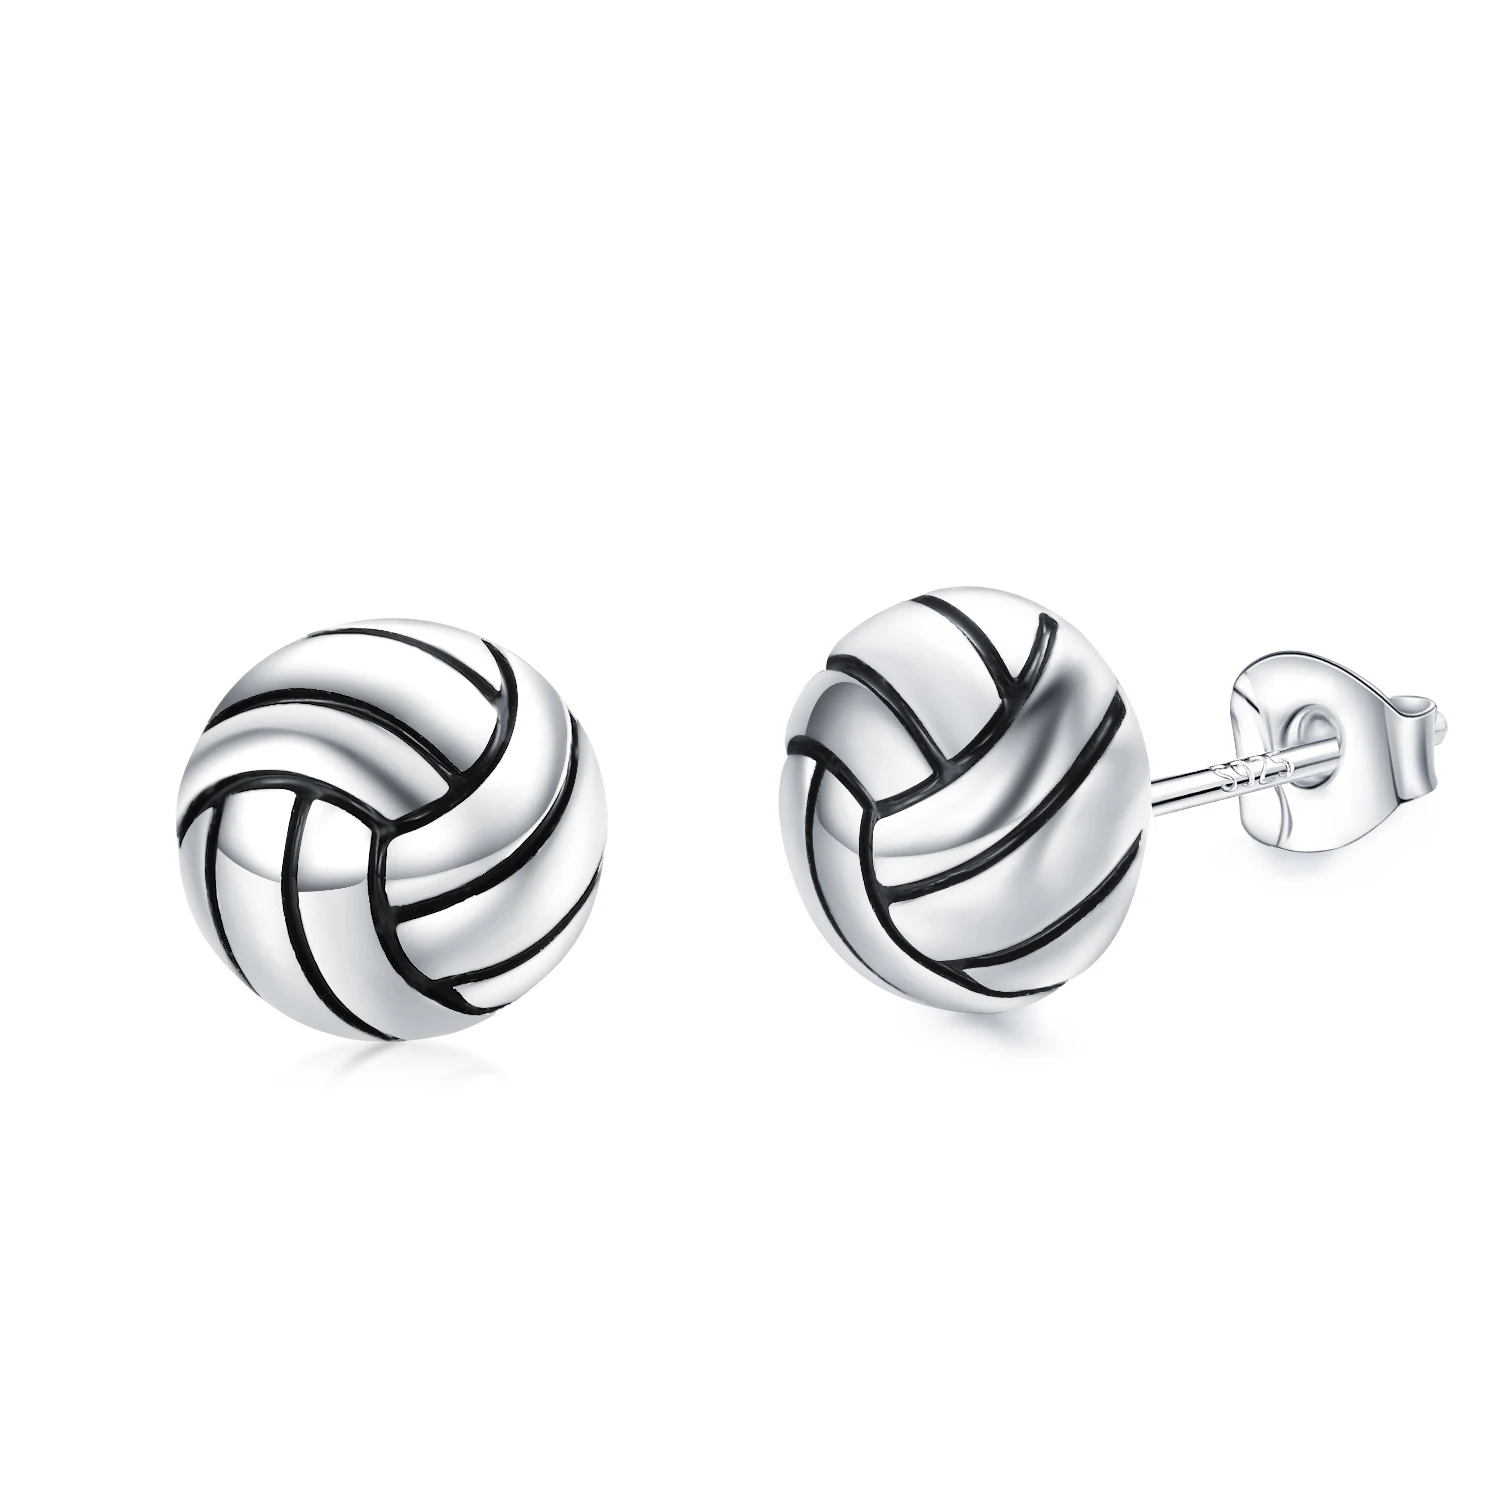 Nosiny 8 Pairs Sports Earrings Sport Jewelry Cute Basketball Volleyball  Football Softball Soccer Tennis Baseball Stud Earrings Sport Stud Earrings  for